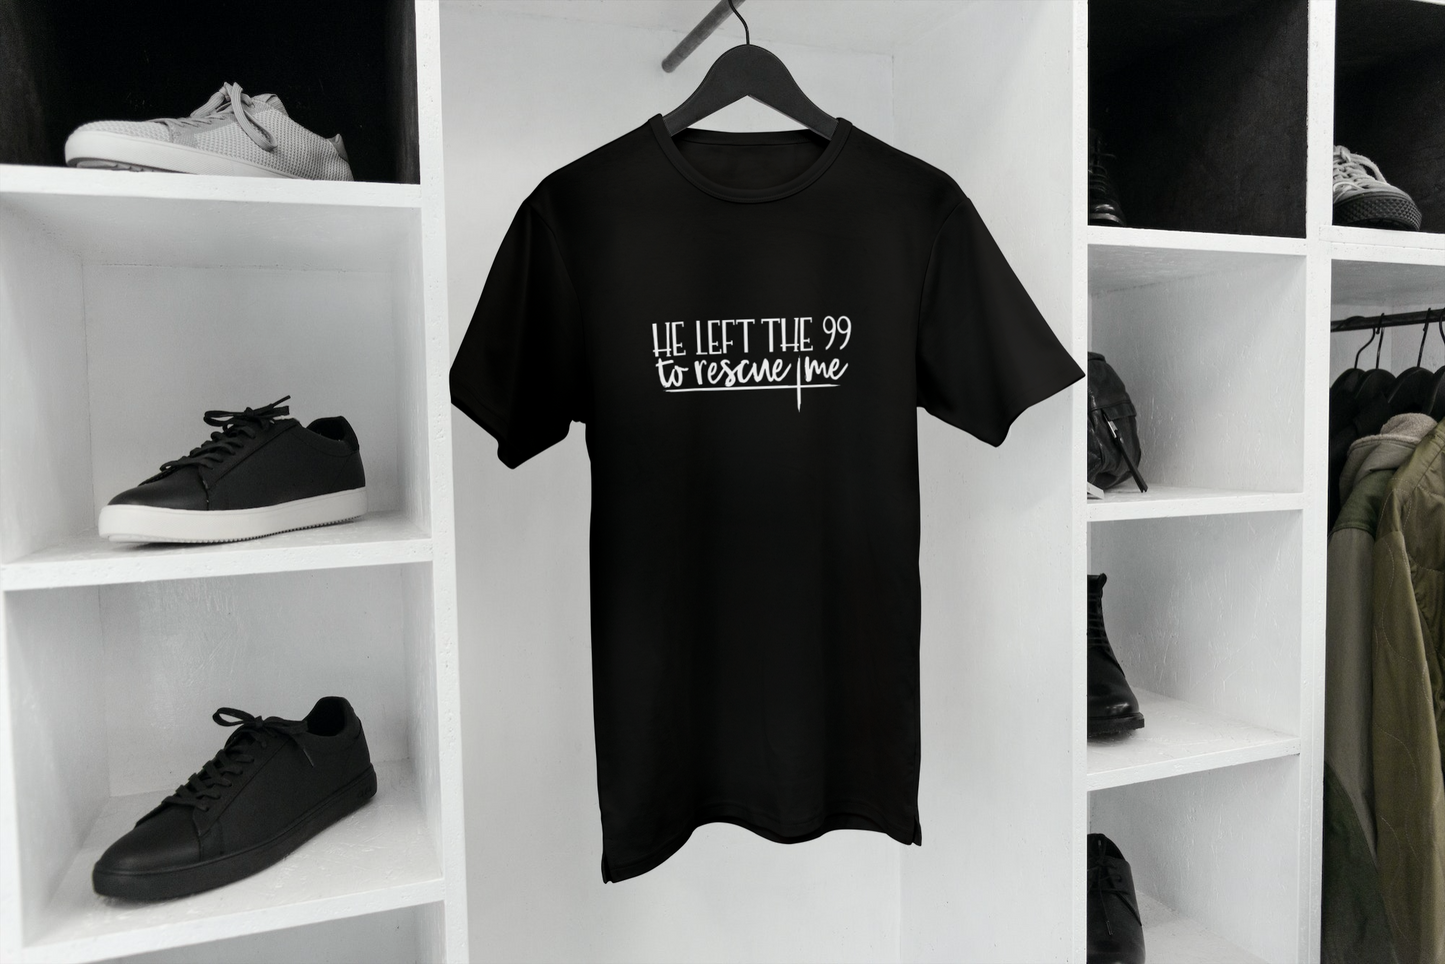 He left the 99 to rescue me T-shirt